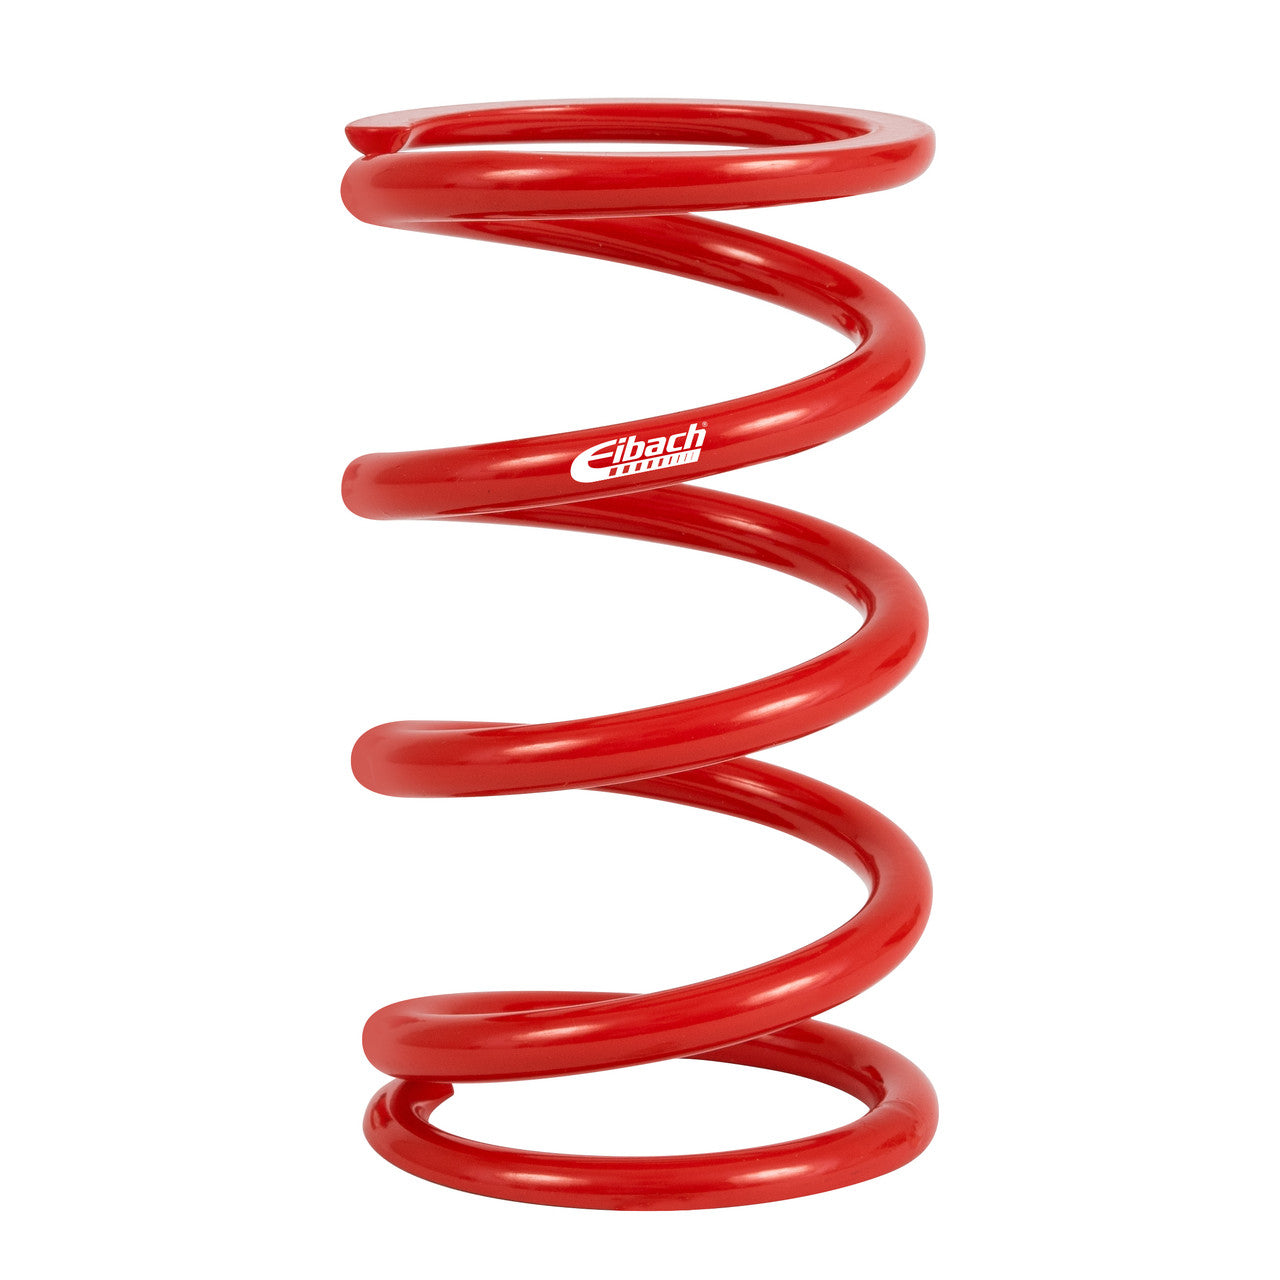 Eibach Metric Coilover Spring - 60MM I.D. 140-60-0280